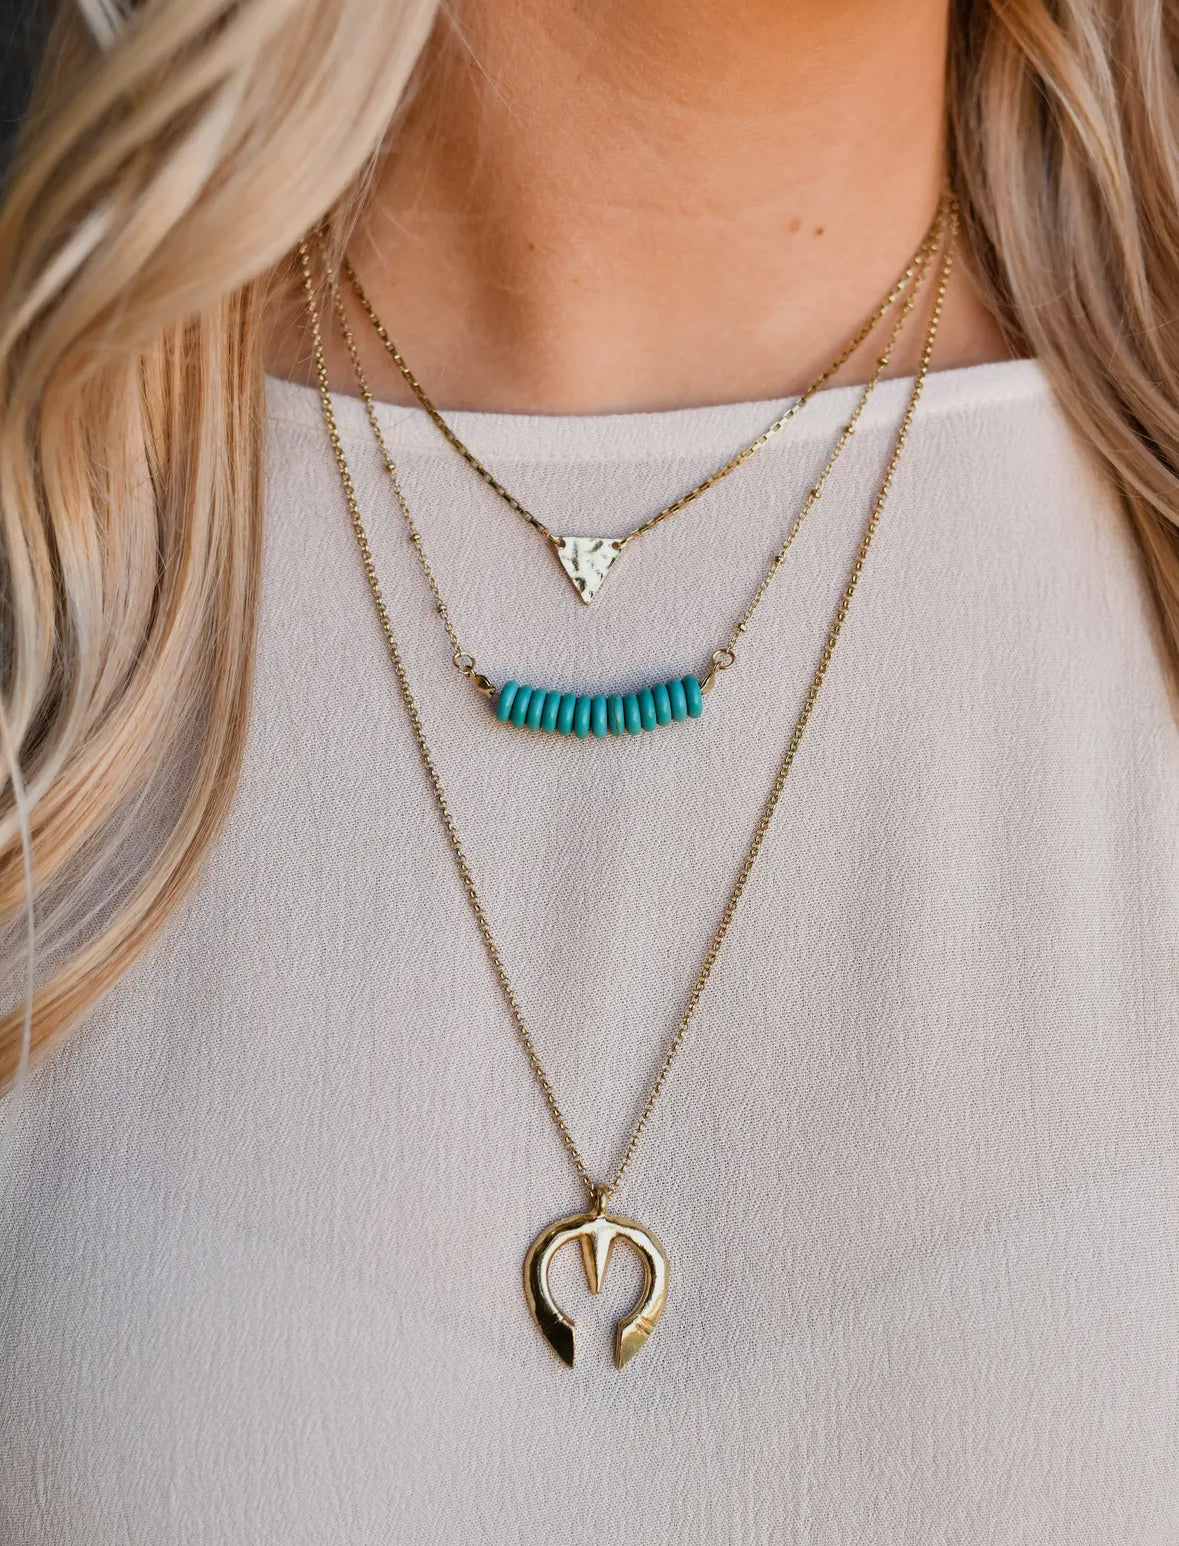 3 Tier Gold & Turquoise Necklace